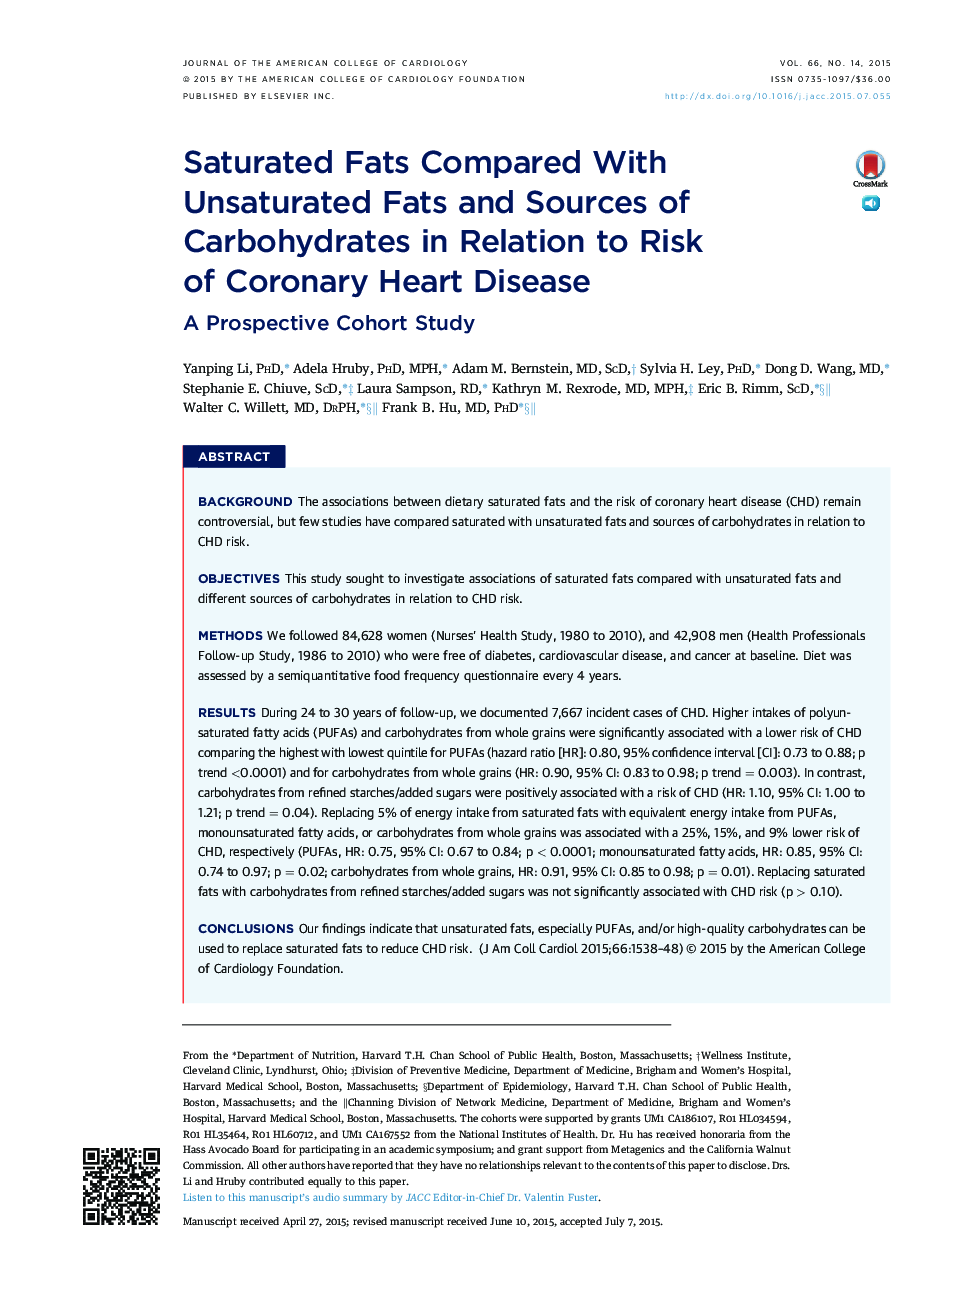 Saturated Fats Compared With Unsaturated Fats and Sources of Carbohydrates in Relation to Risk ofÂ Coronary Heart Disease: A Prospective Cohort Study